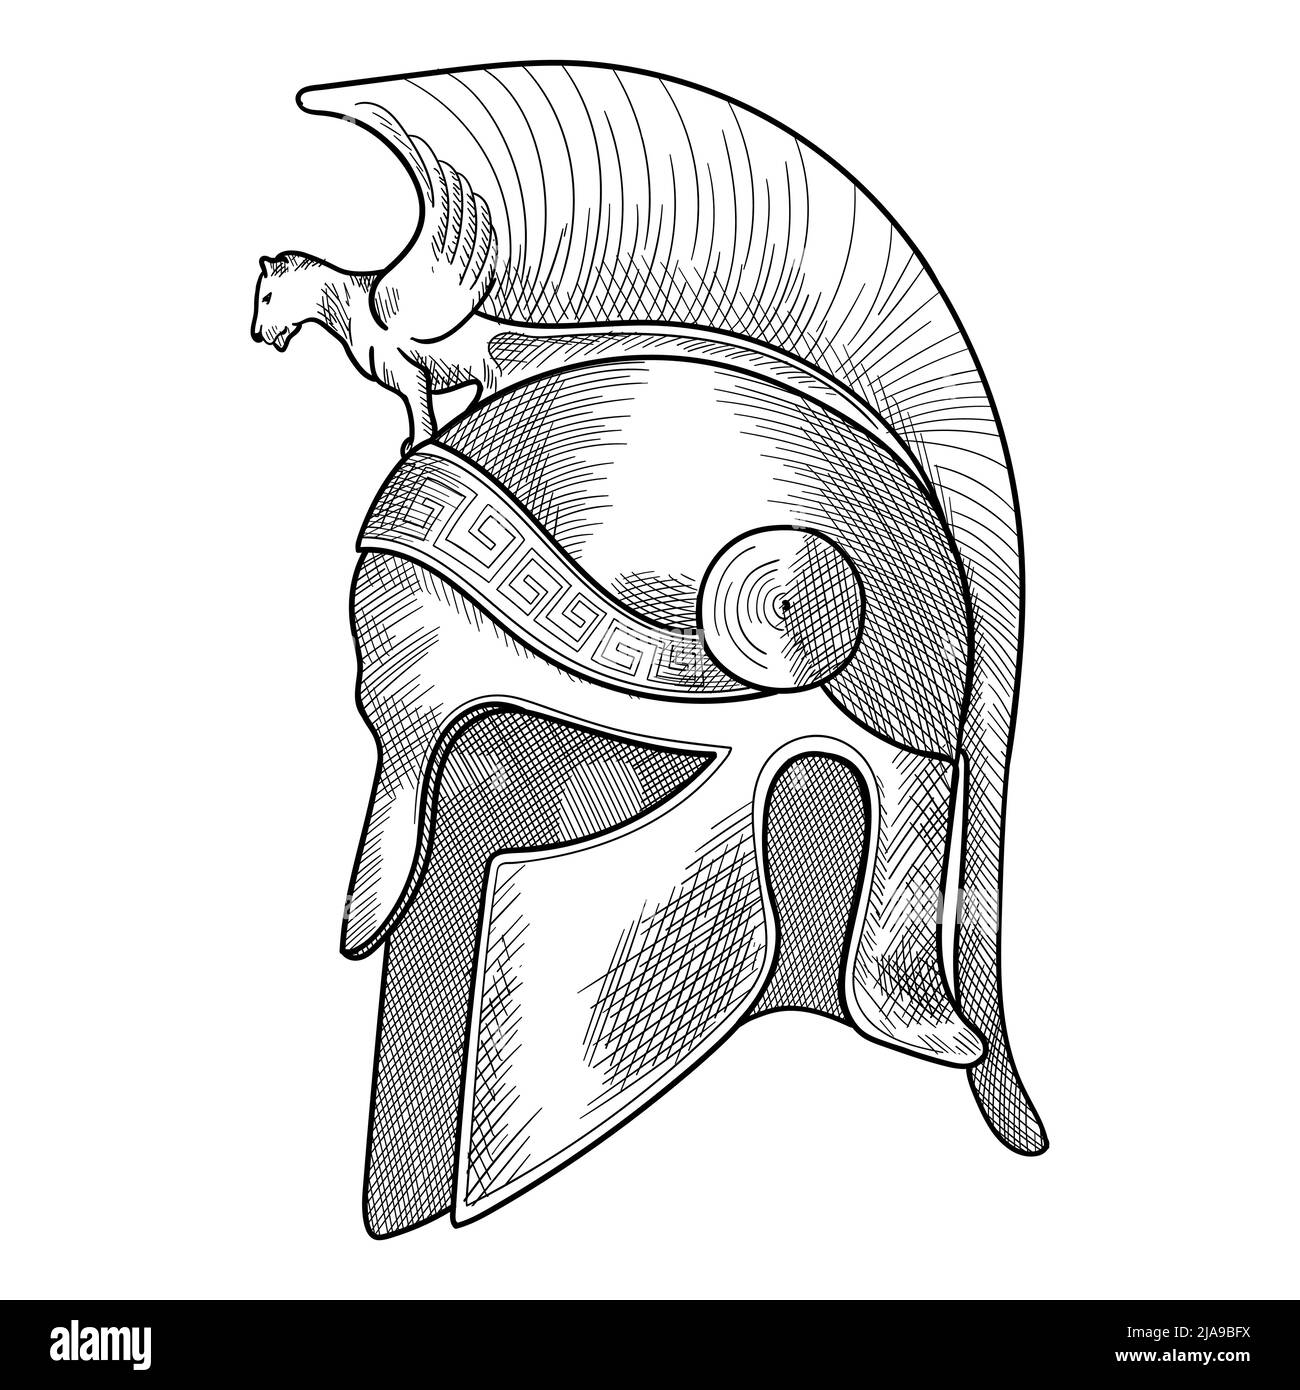 Helmet of the ancient Greek warrior hoplite with a national meander ornament. Simple hand sketch isolated on white background. Stock Vector